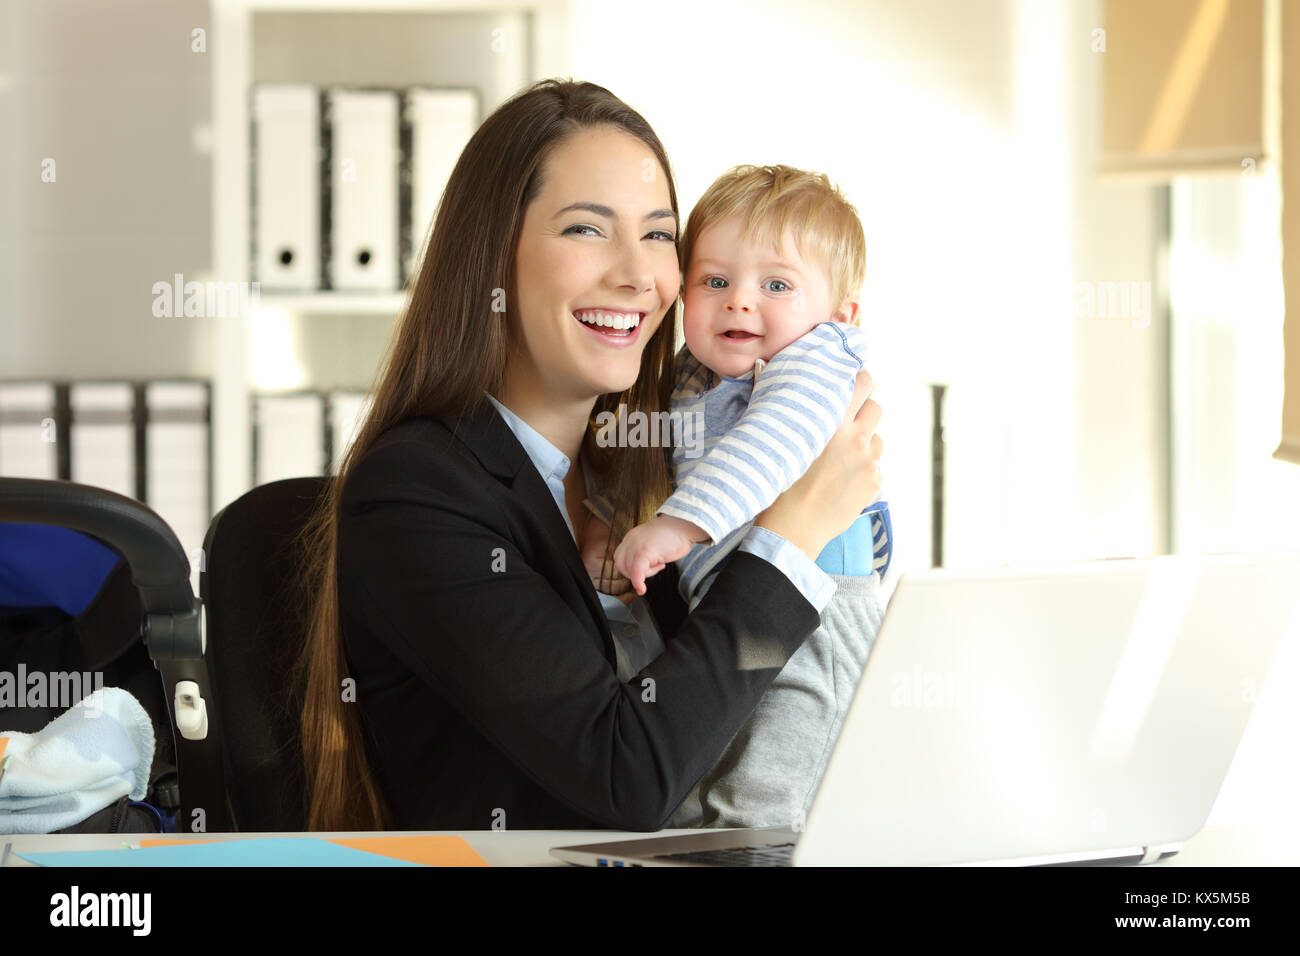 Portrait of a happy working mother posing with her baby and looking at camera at office Stock Photo